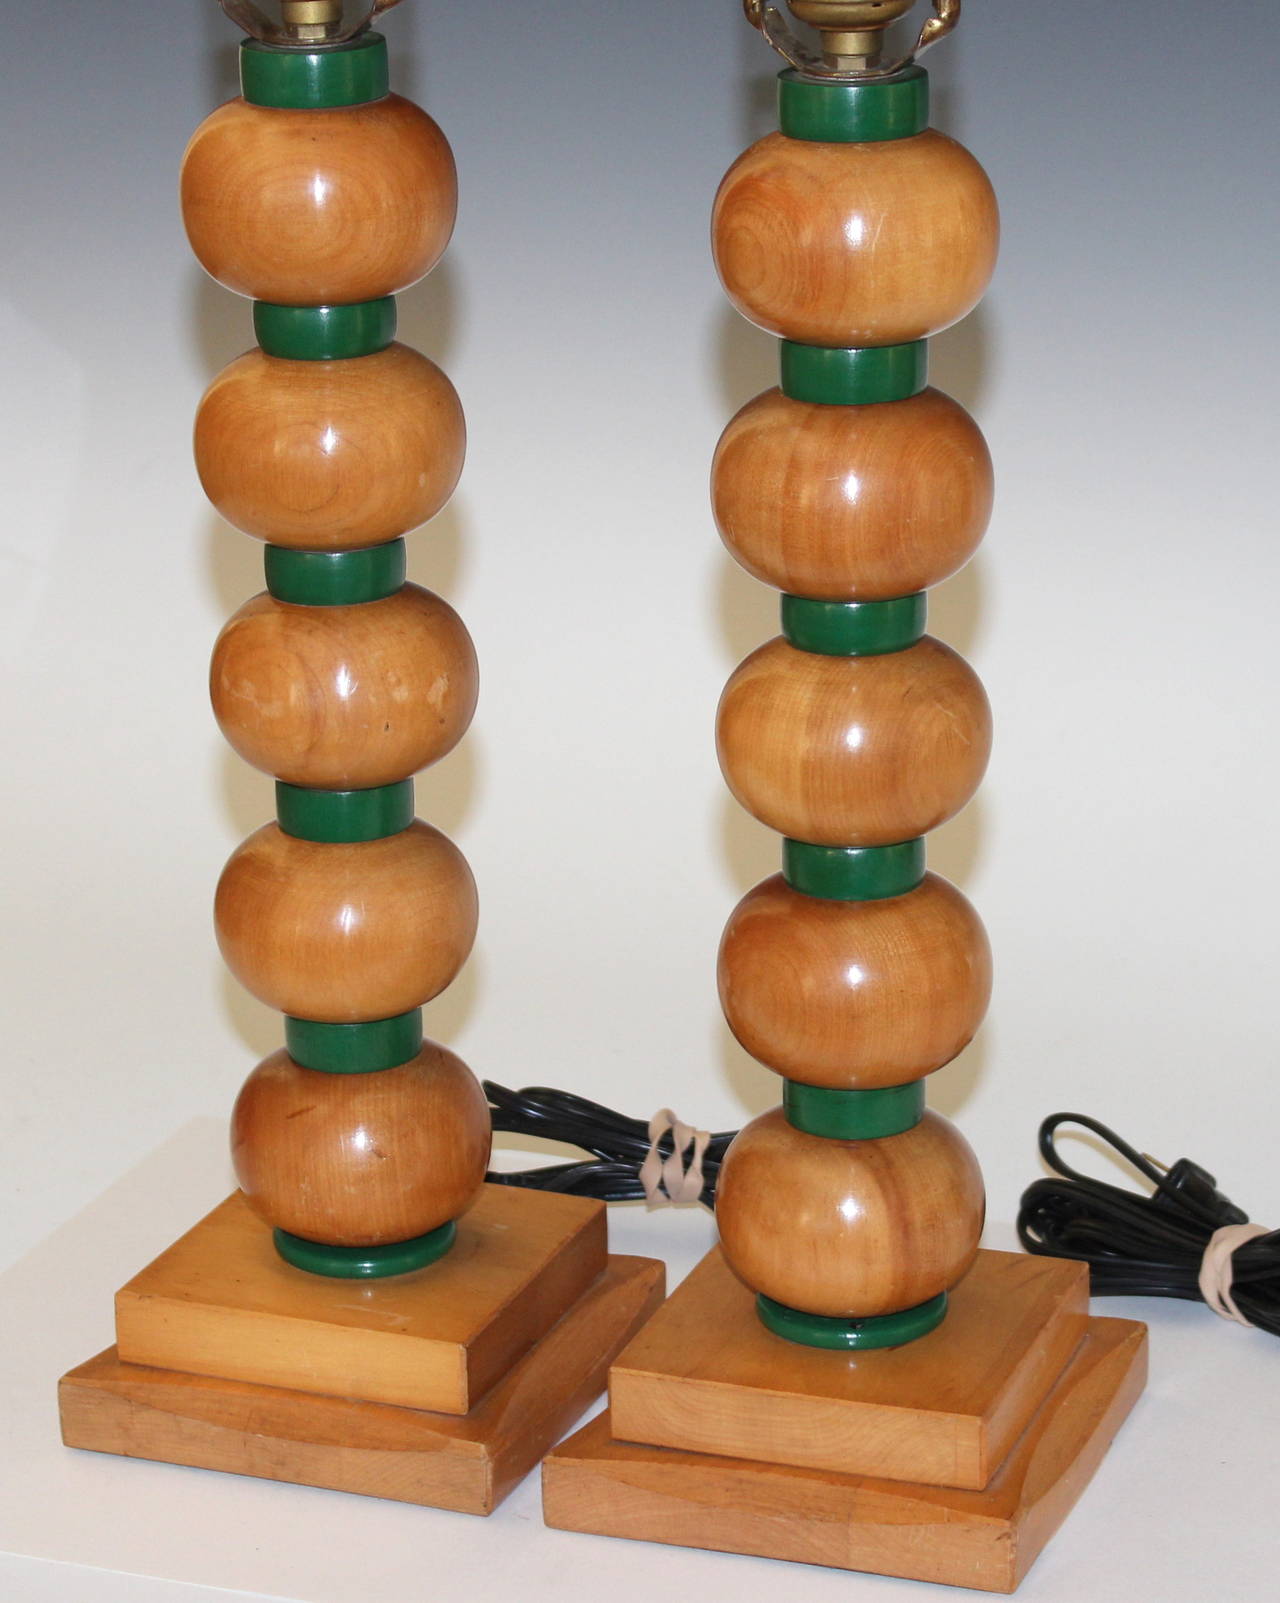 Maple Pair of Vintage Art Deco Atomic Age 1940s Molecular Model Turned Orb Lamps